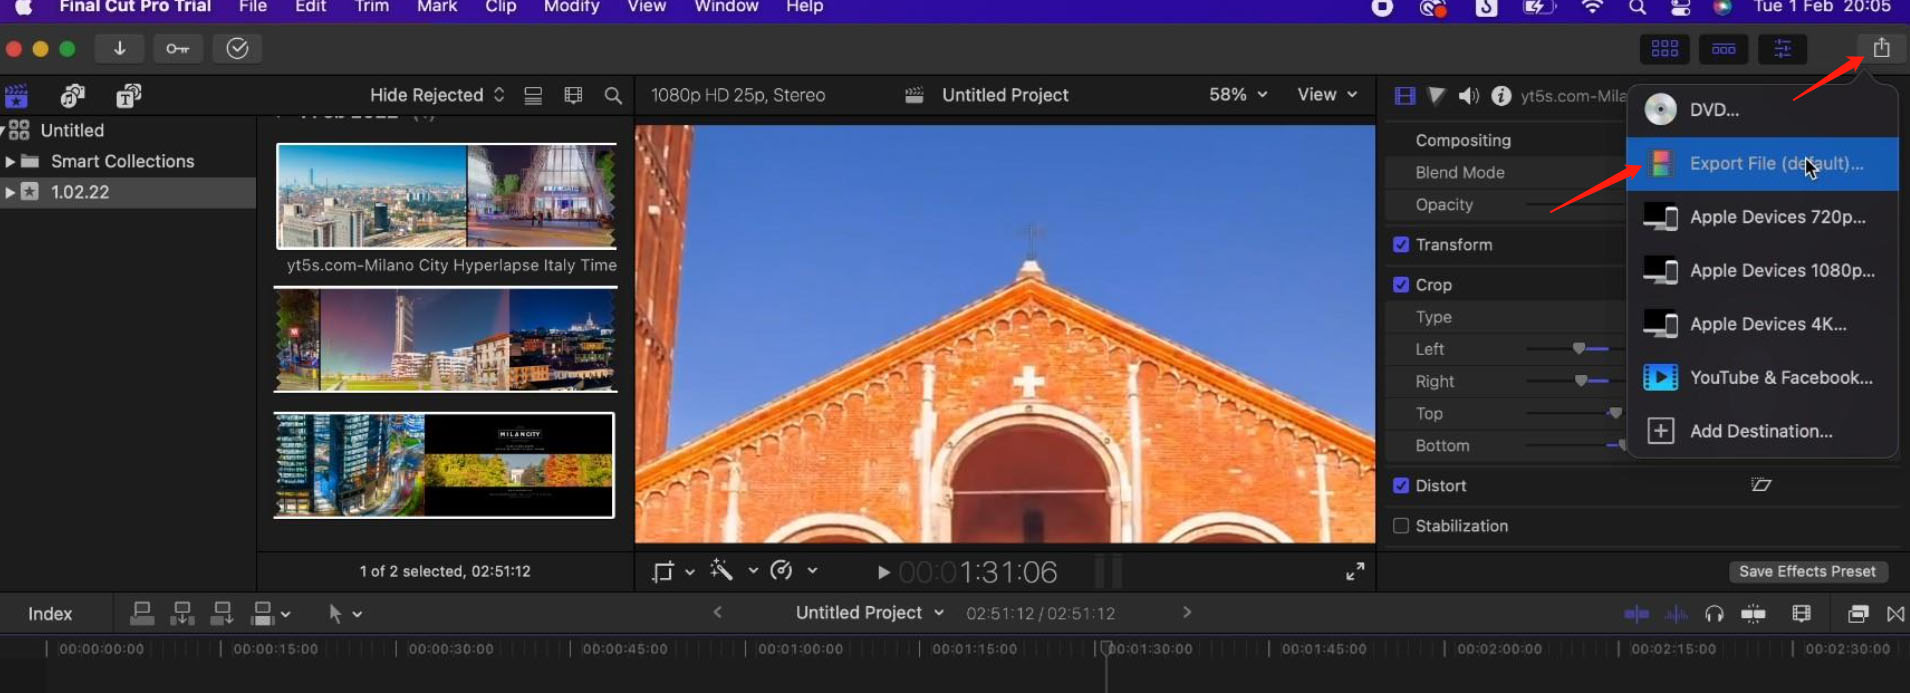 Save Cropped Video in Final Cut Pro